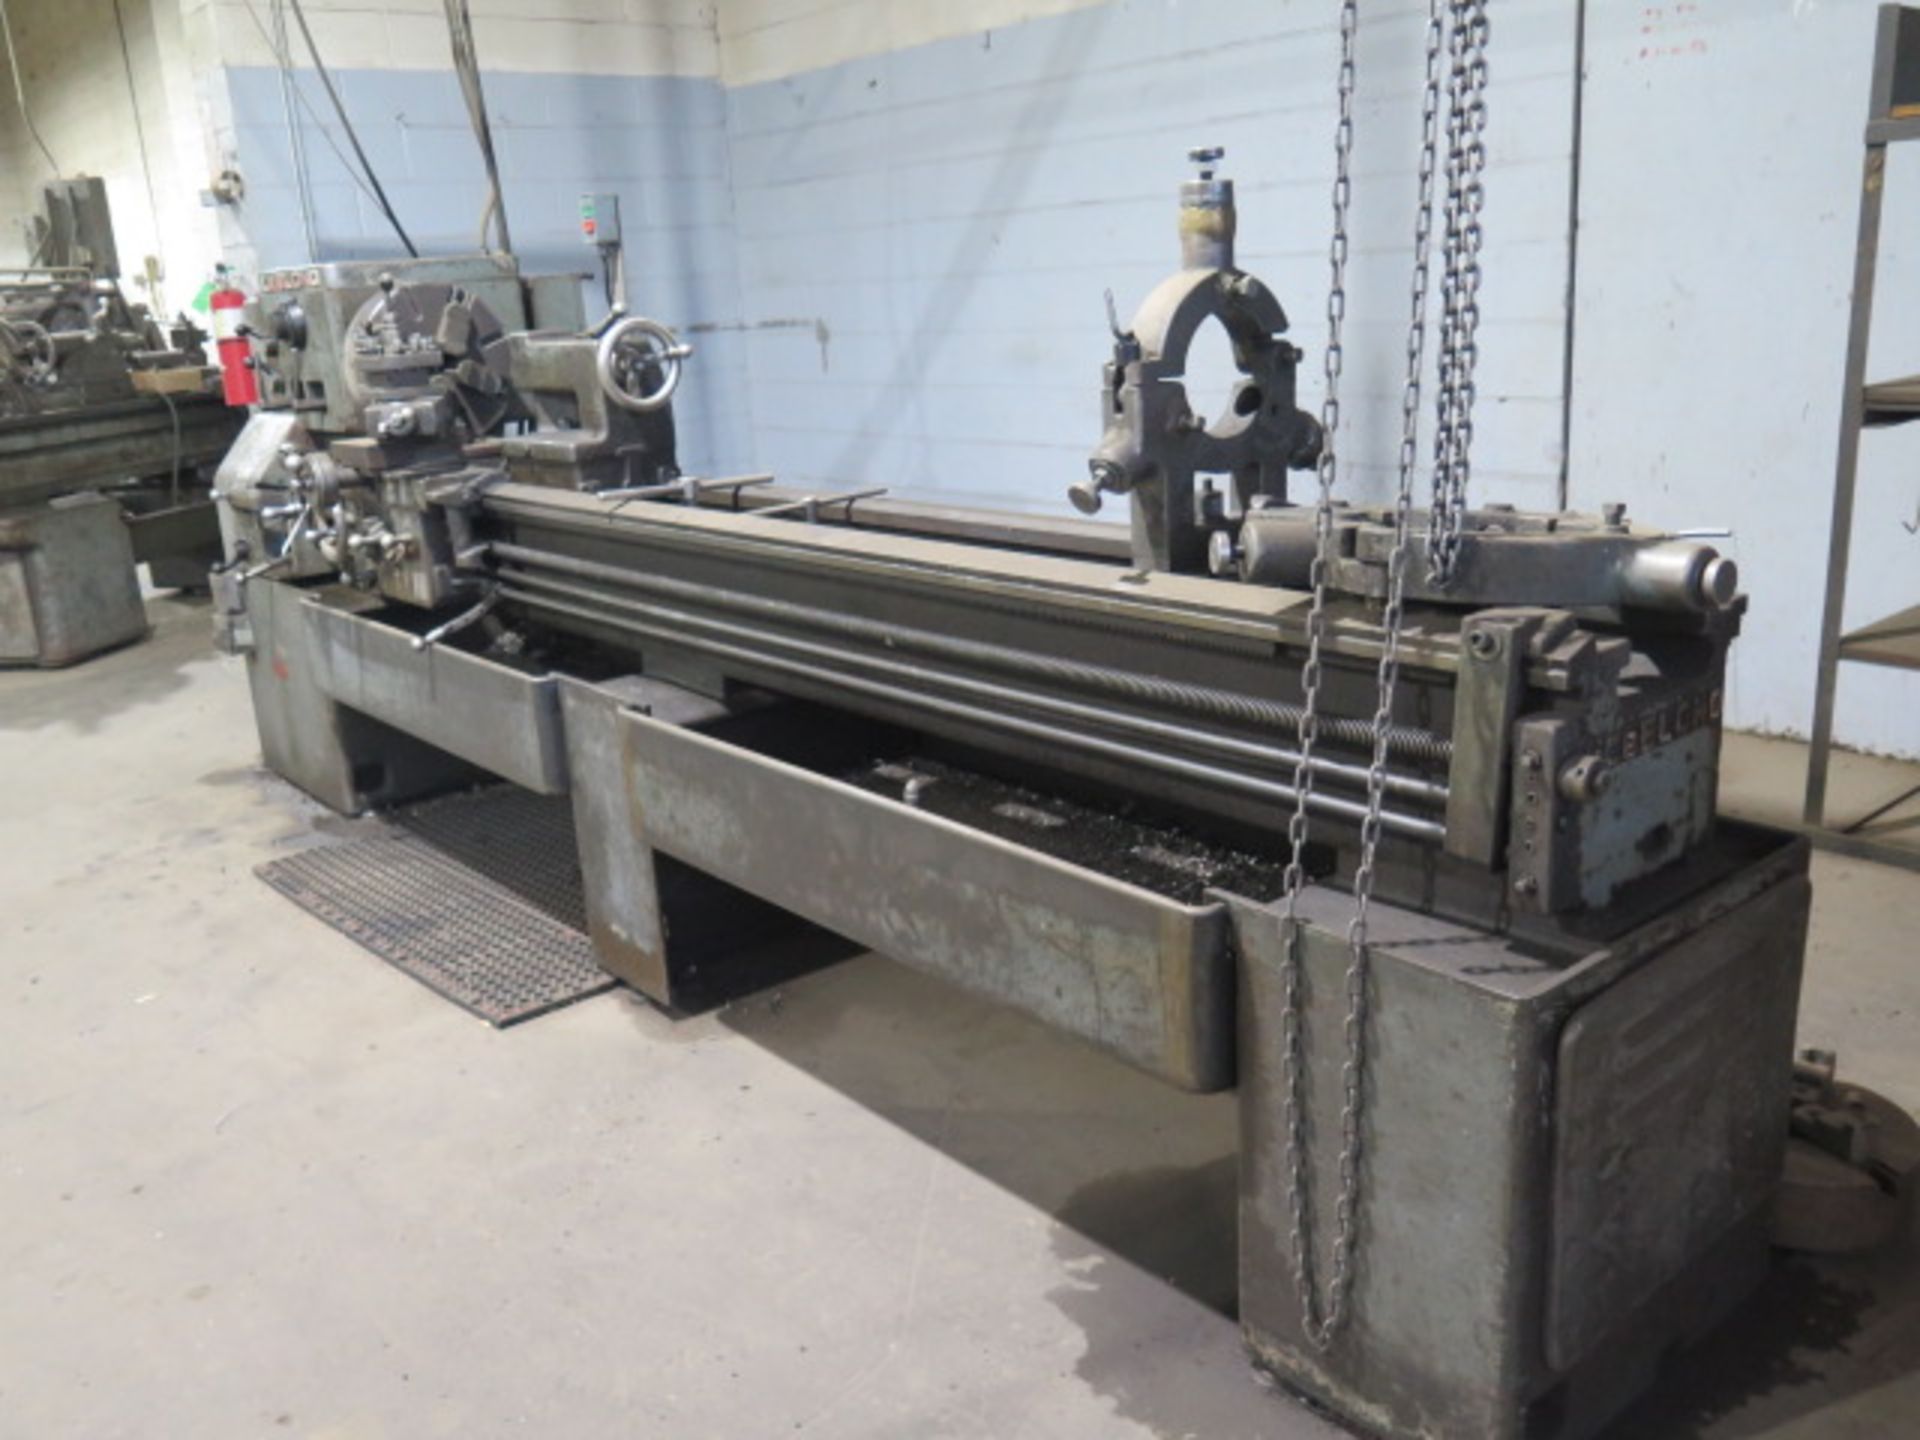 LeBlond 19” x 106” Lathe w/ 25-1000 Dial Change RPM, Inch Threading, Tailstock, (2) Steady Rests, - Image 3 of 11